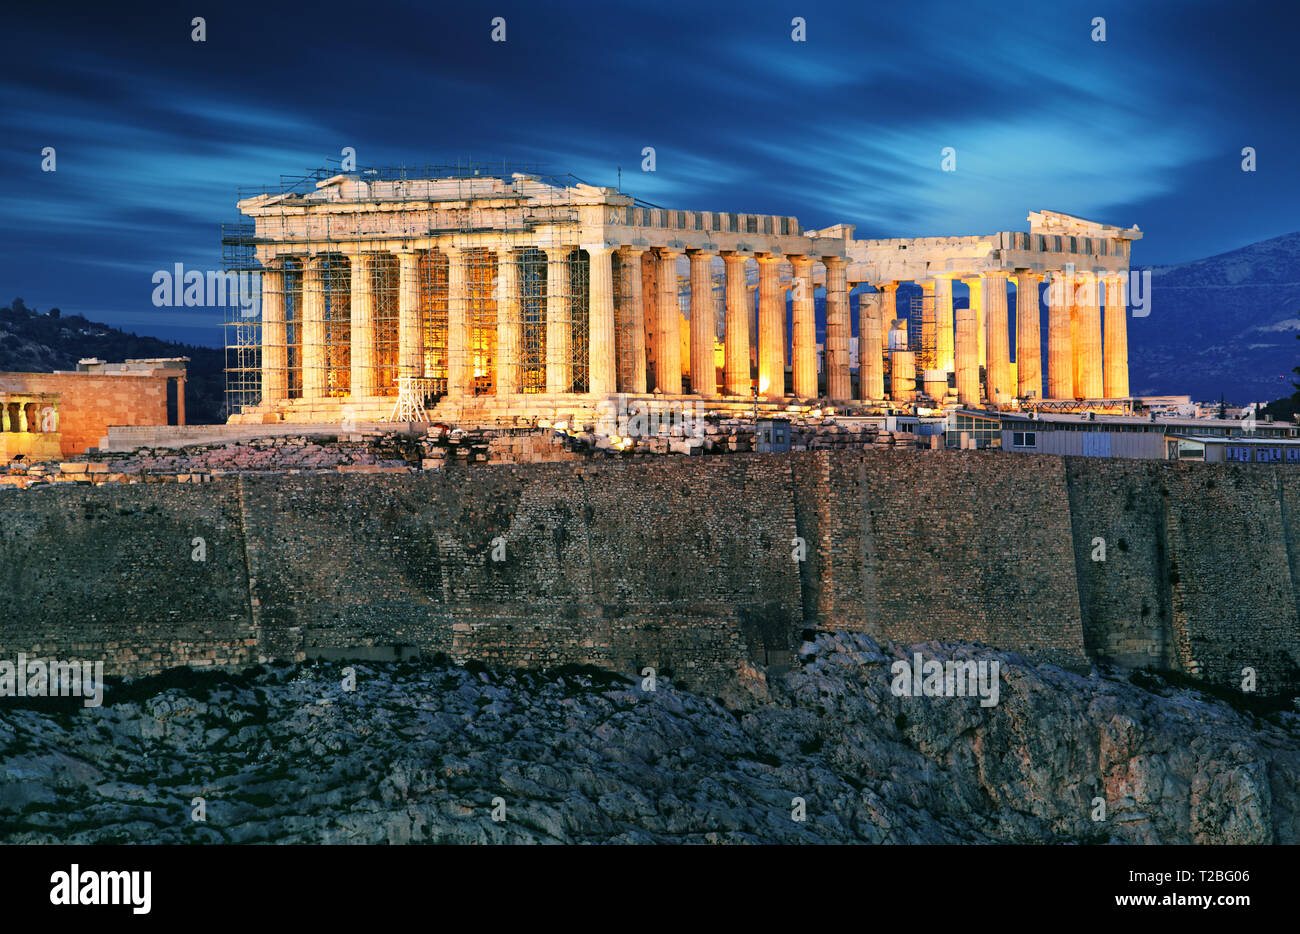 Acropolis hill - Parthenon temple in Athens at night, Greece Stock Photo